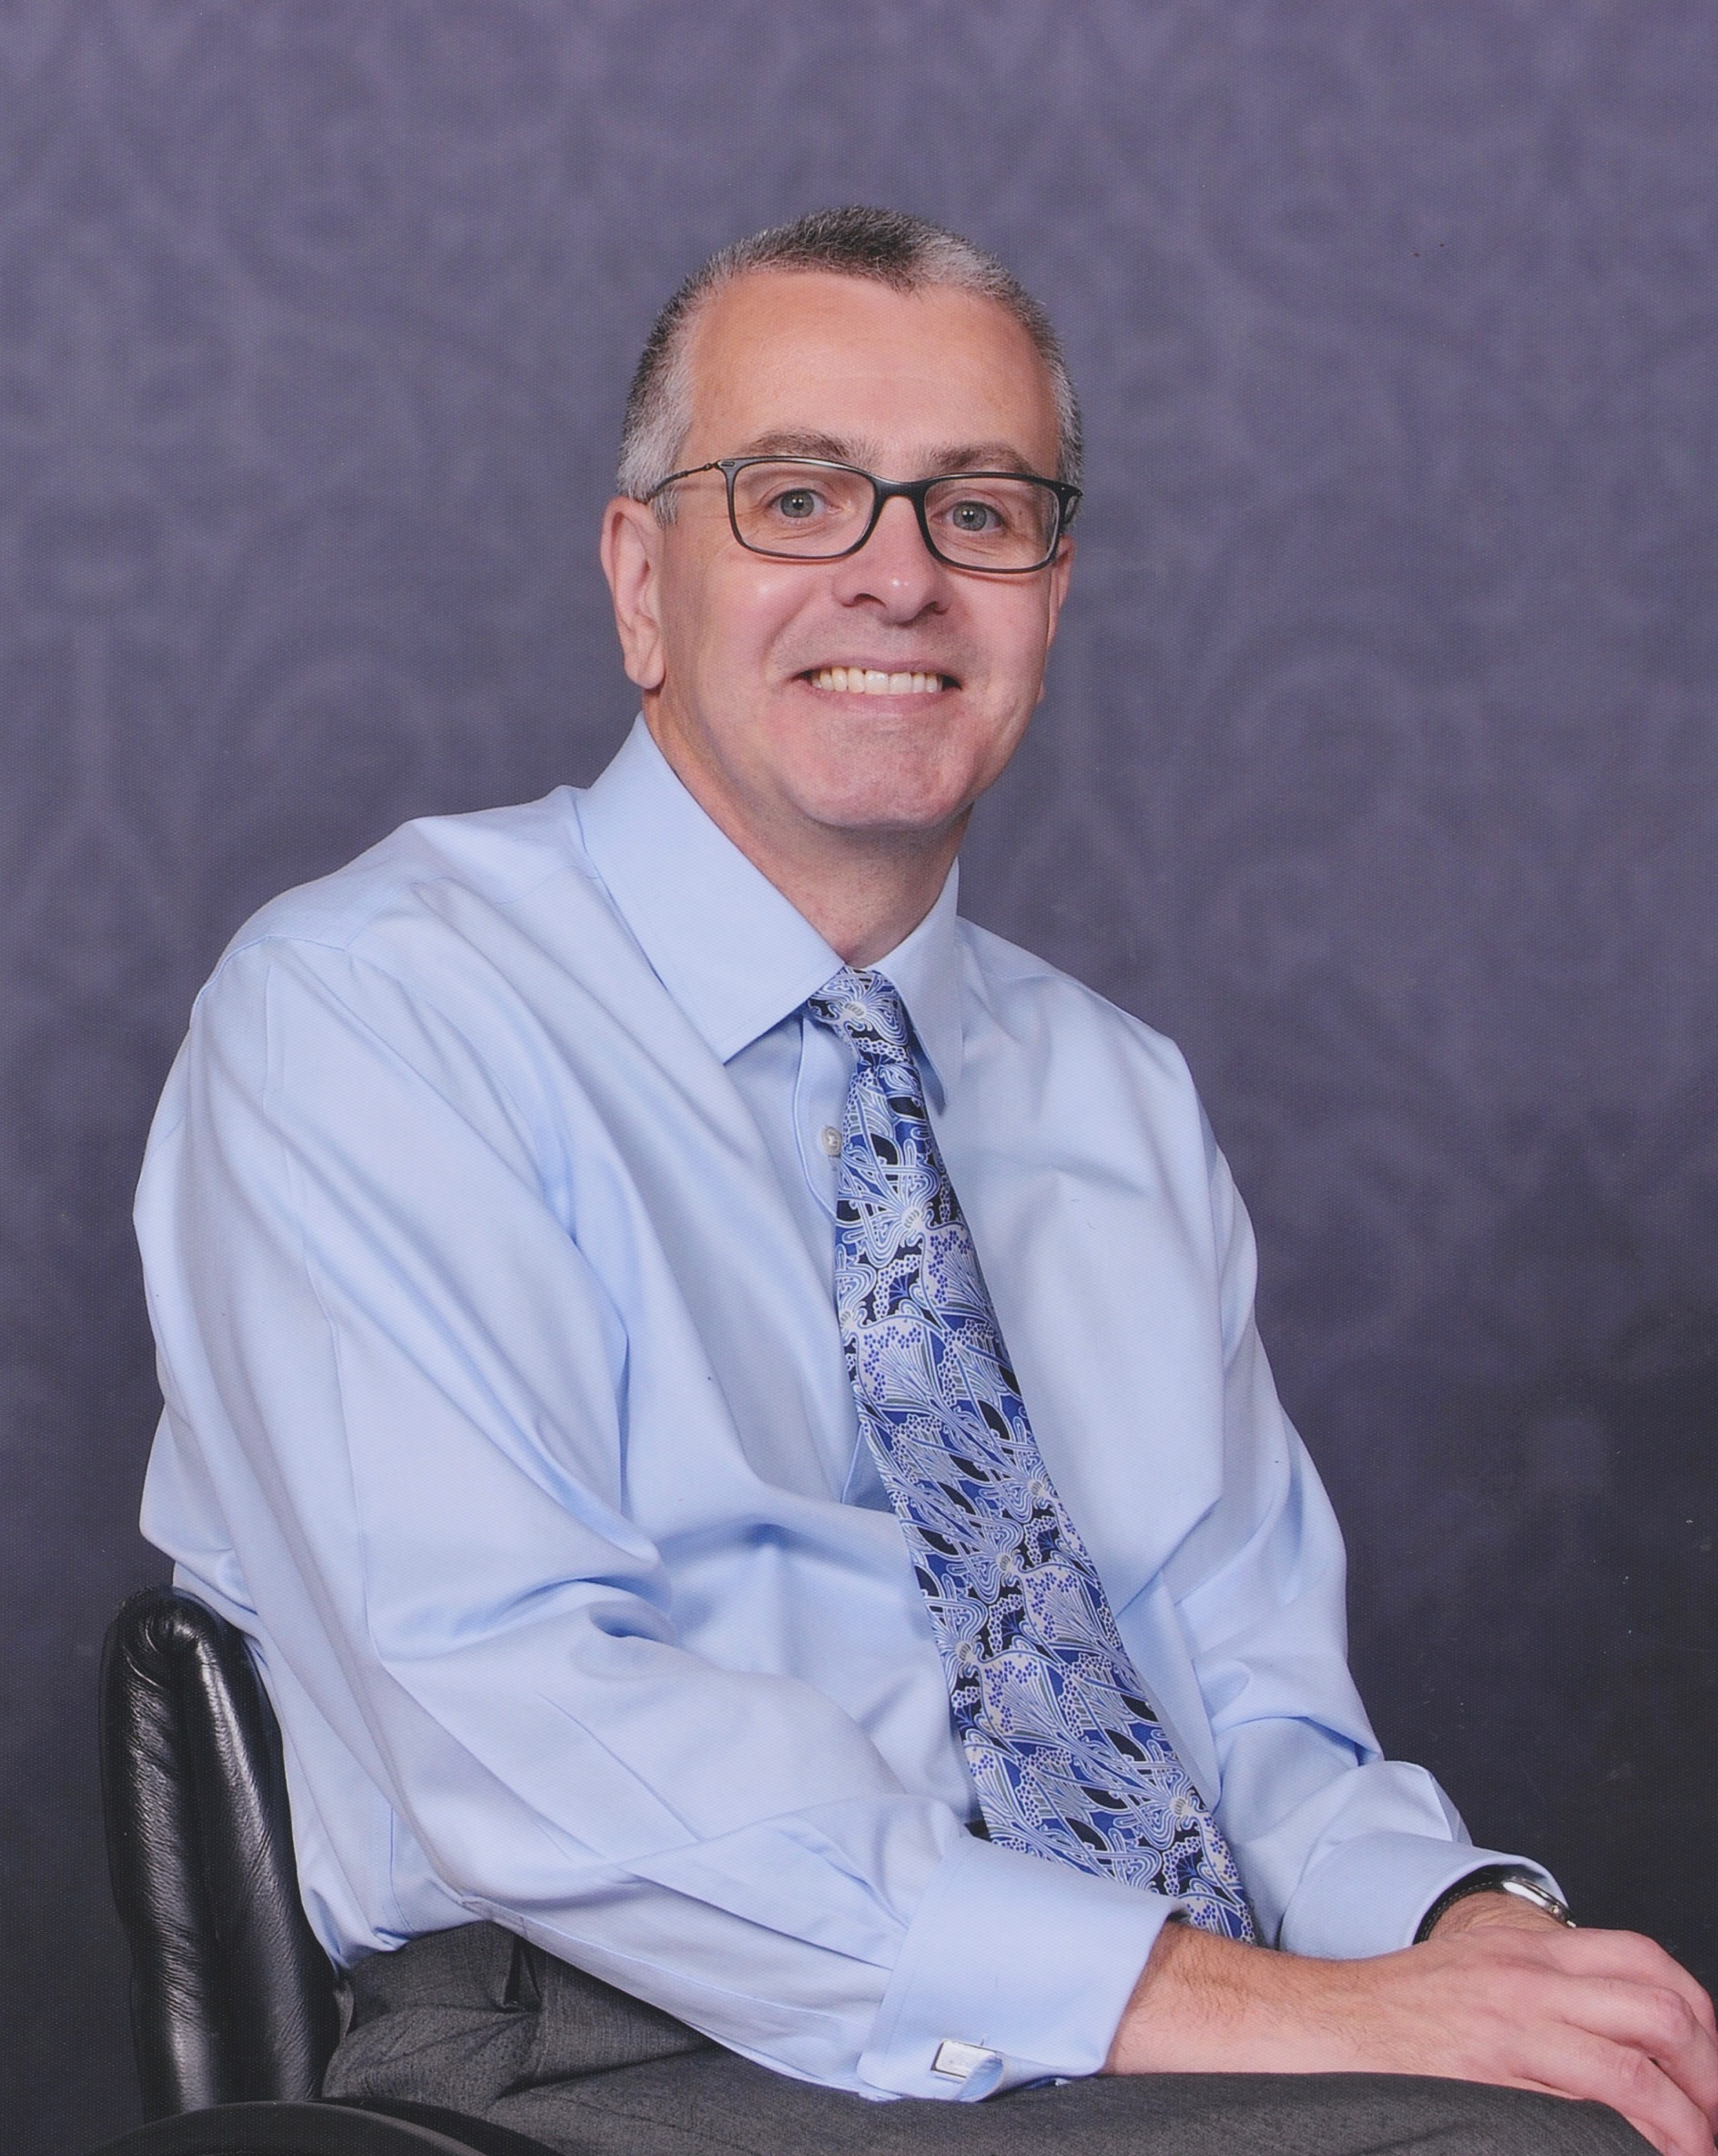 Portrait photo of Dr Tom Wells MBE. He is wearing a blue shirt, tie, glasses, and is smiling at the camera.